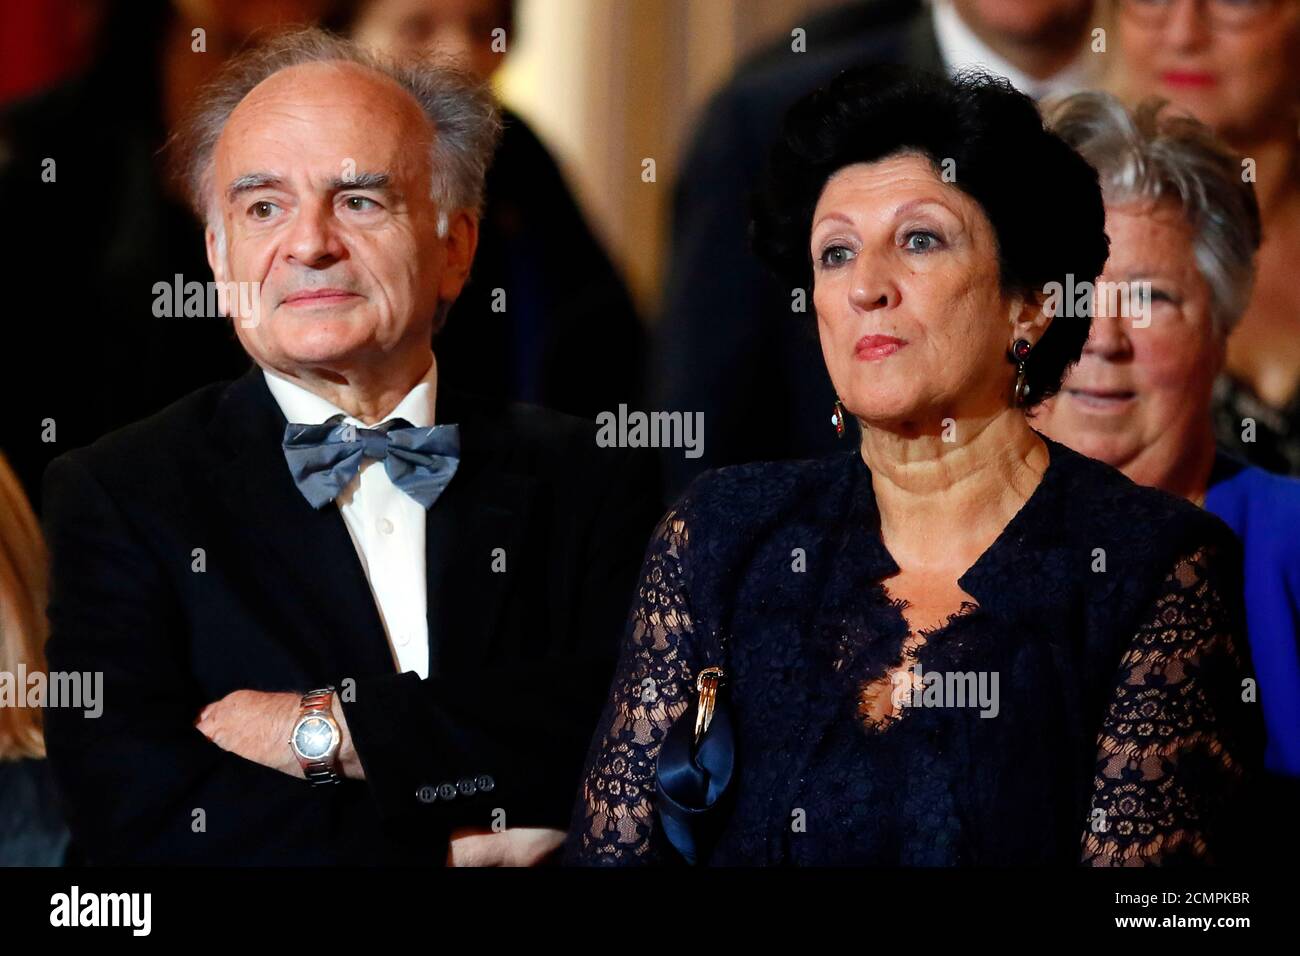 The parents of French President Emmanuel Macron, Jean-Michel Macron (L) and  Françoise Nogues-Macron, listen during his inauguration at the Elysee  Palace in Paris, France, May 14, 2017. REUTERS/Francois Mori/Pool Stock  Photo -